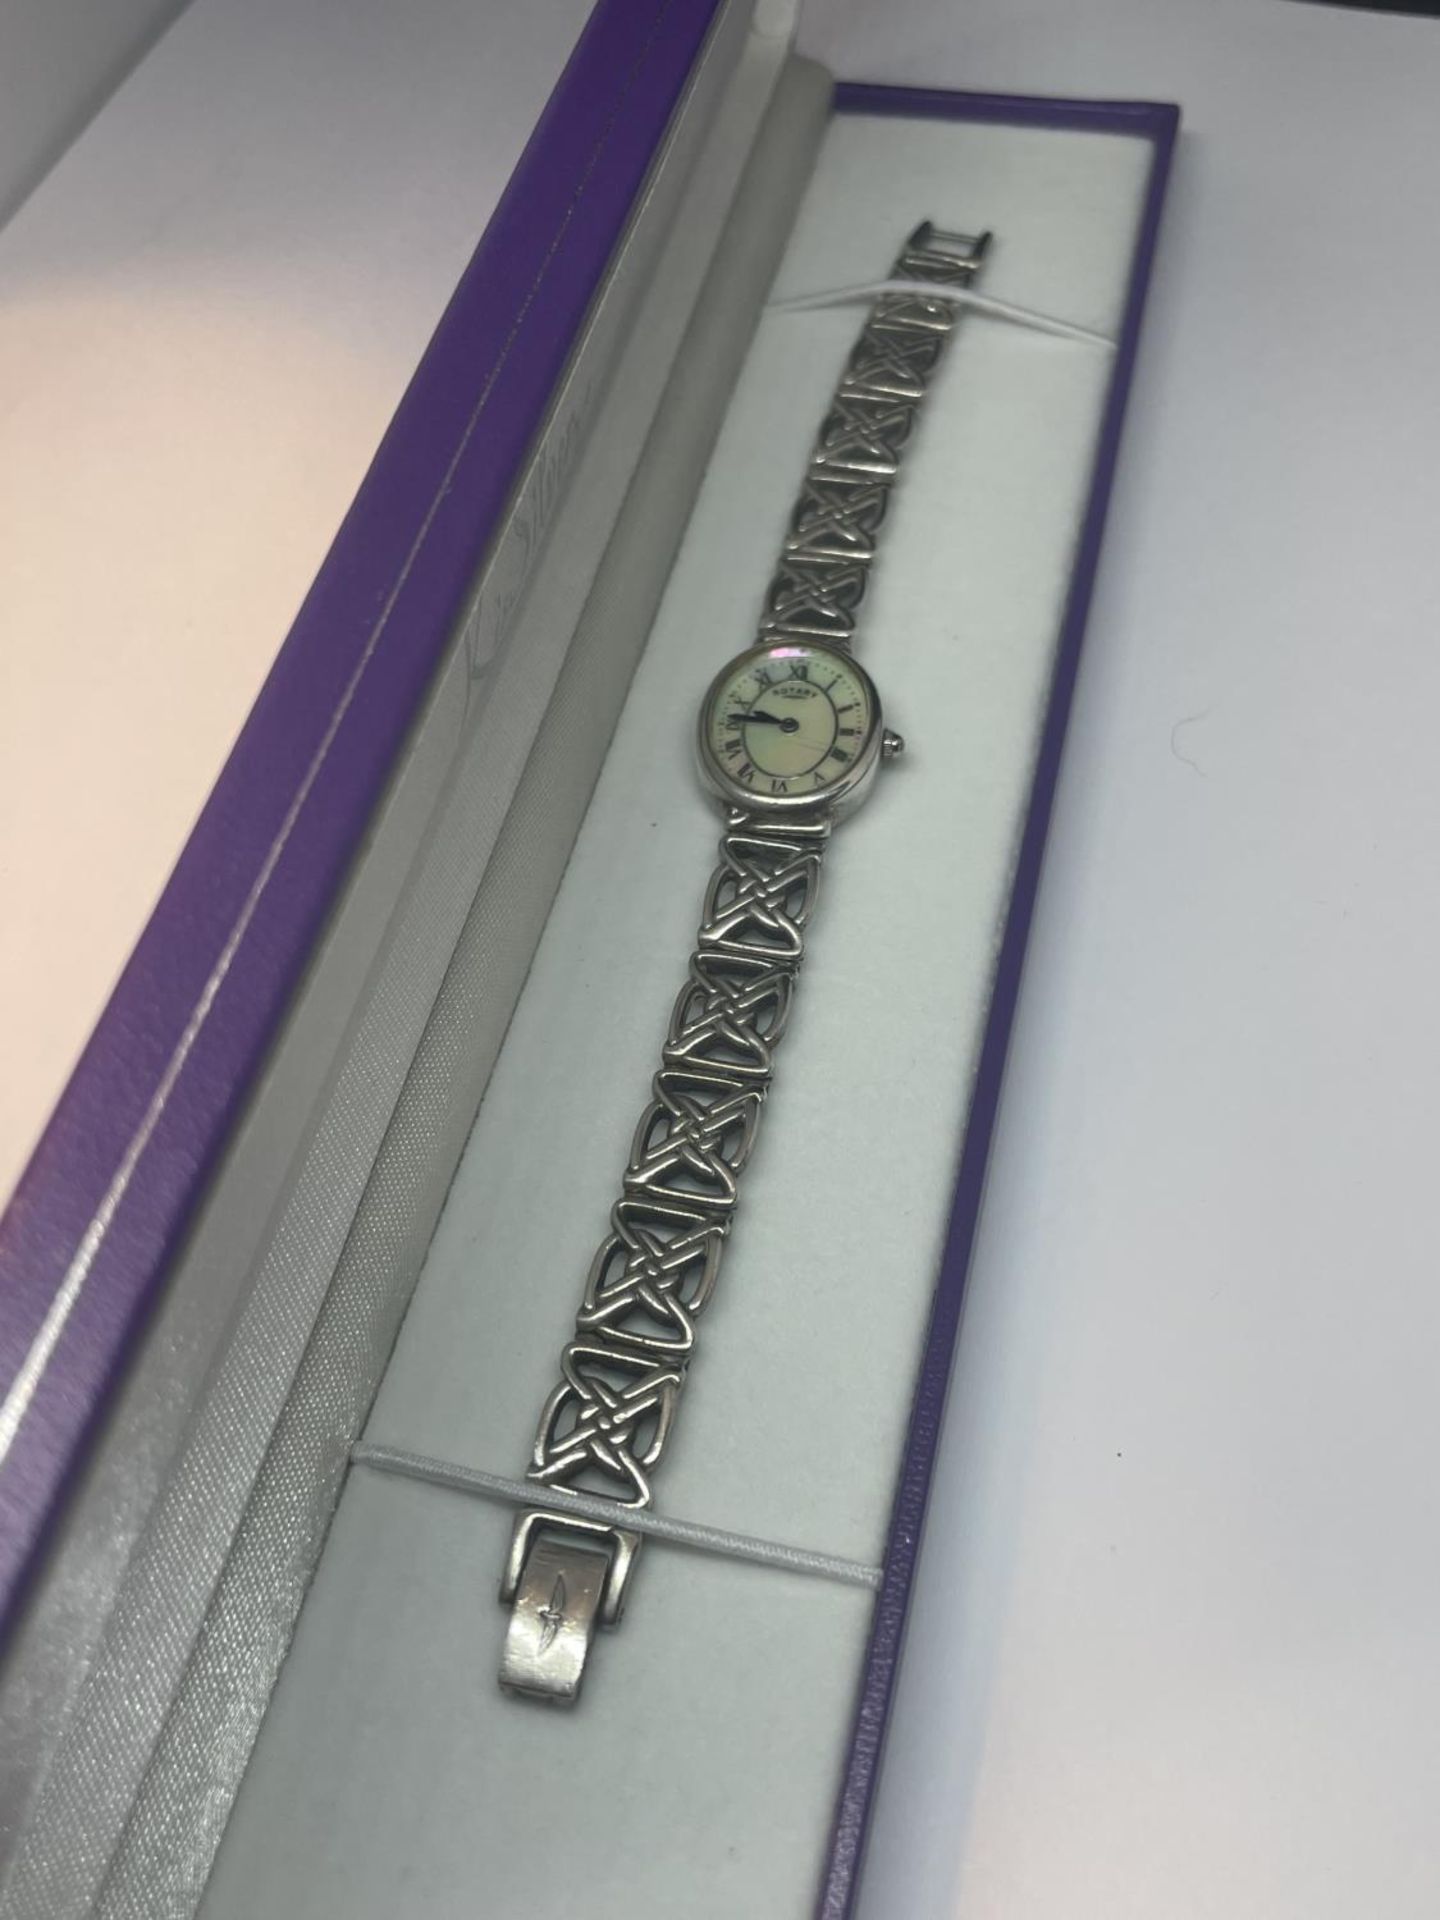 A SILVER ROTARY WRIST WATCH WITH A PEARLISED FACE IN A PRESENTATION BOX